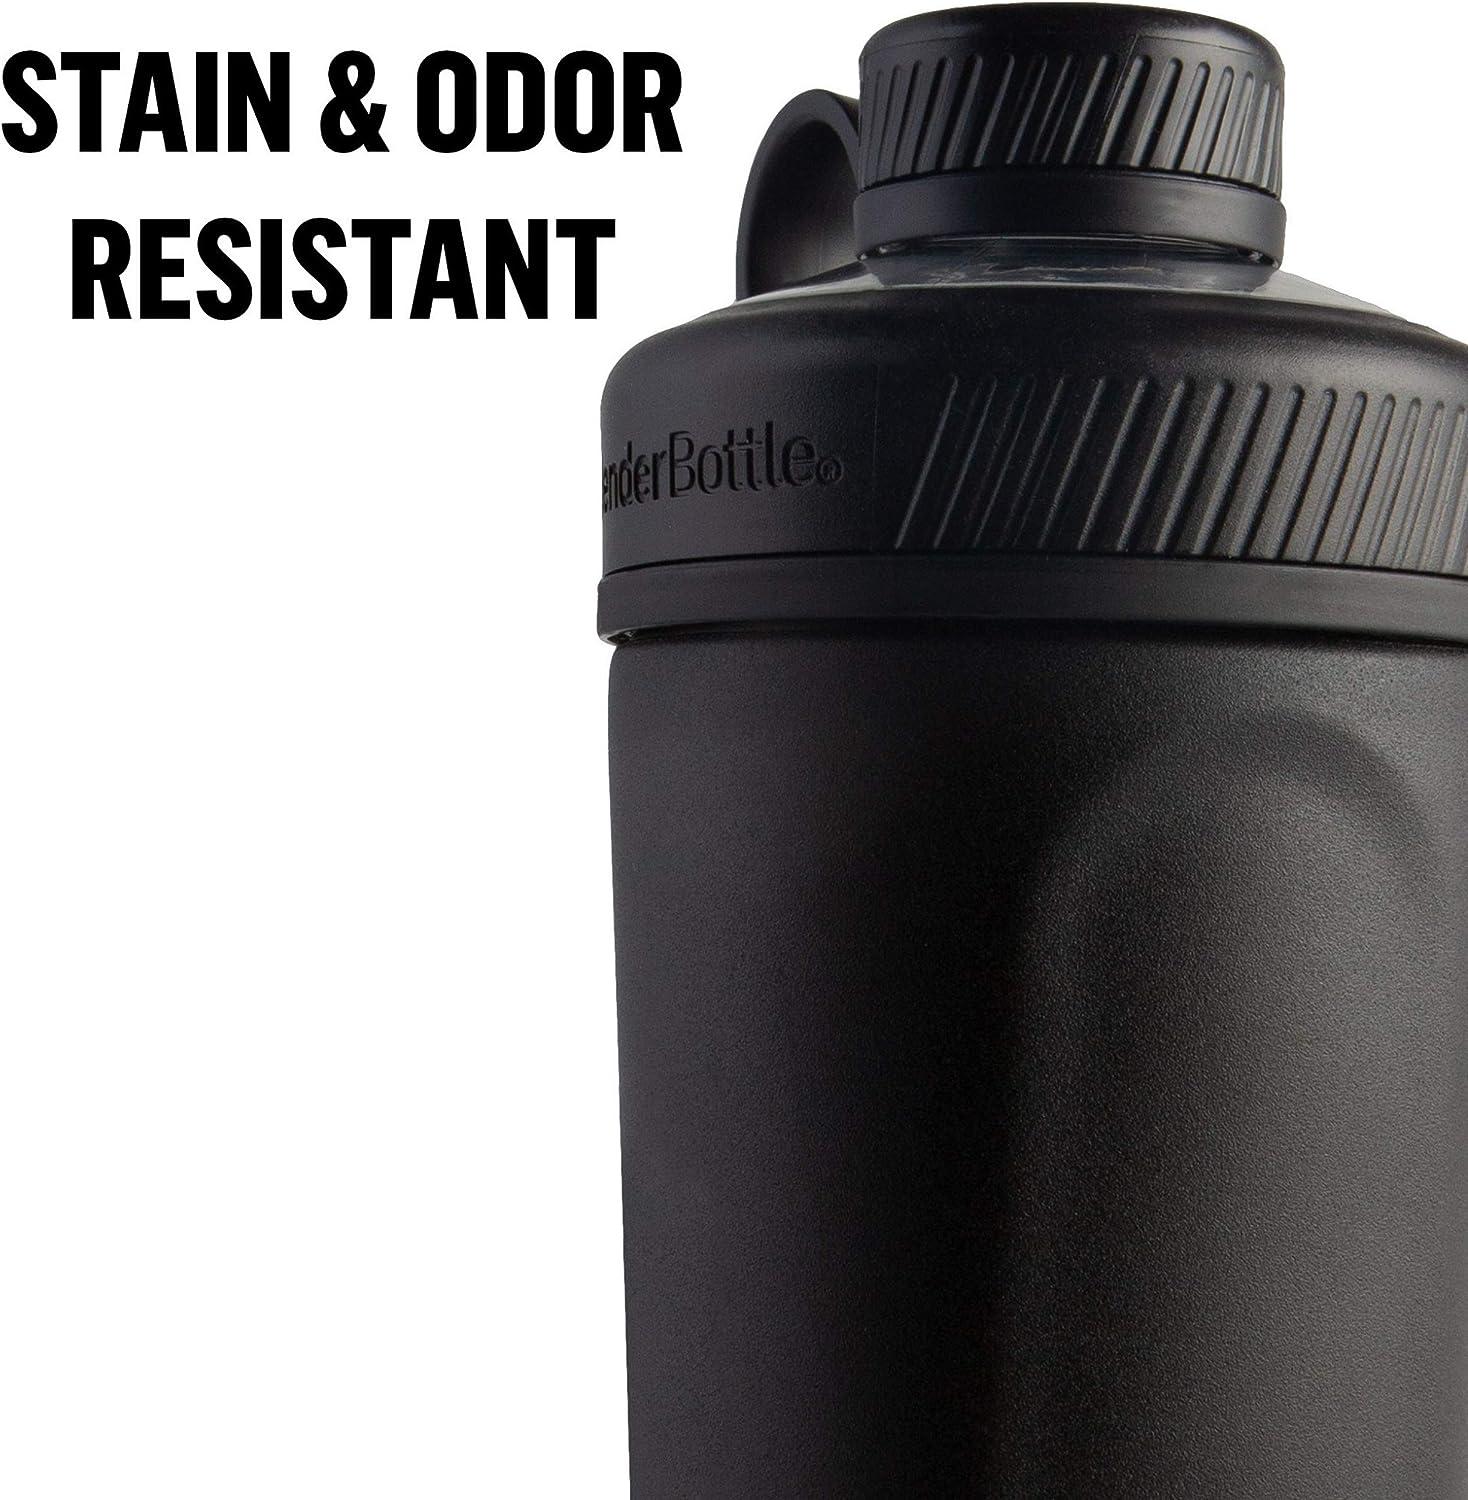 Star Wars - Strada Insulated Stainless Steel